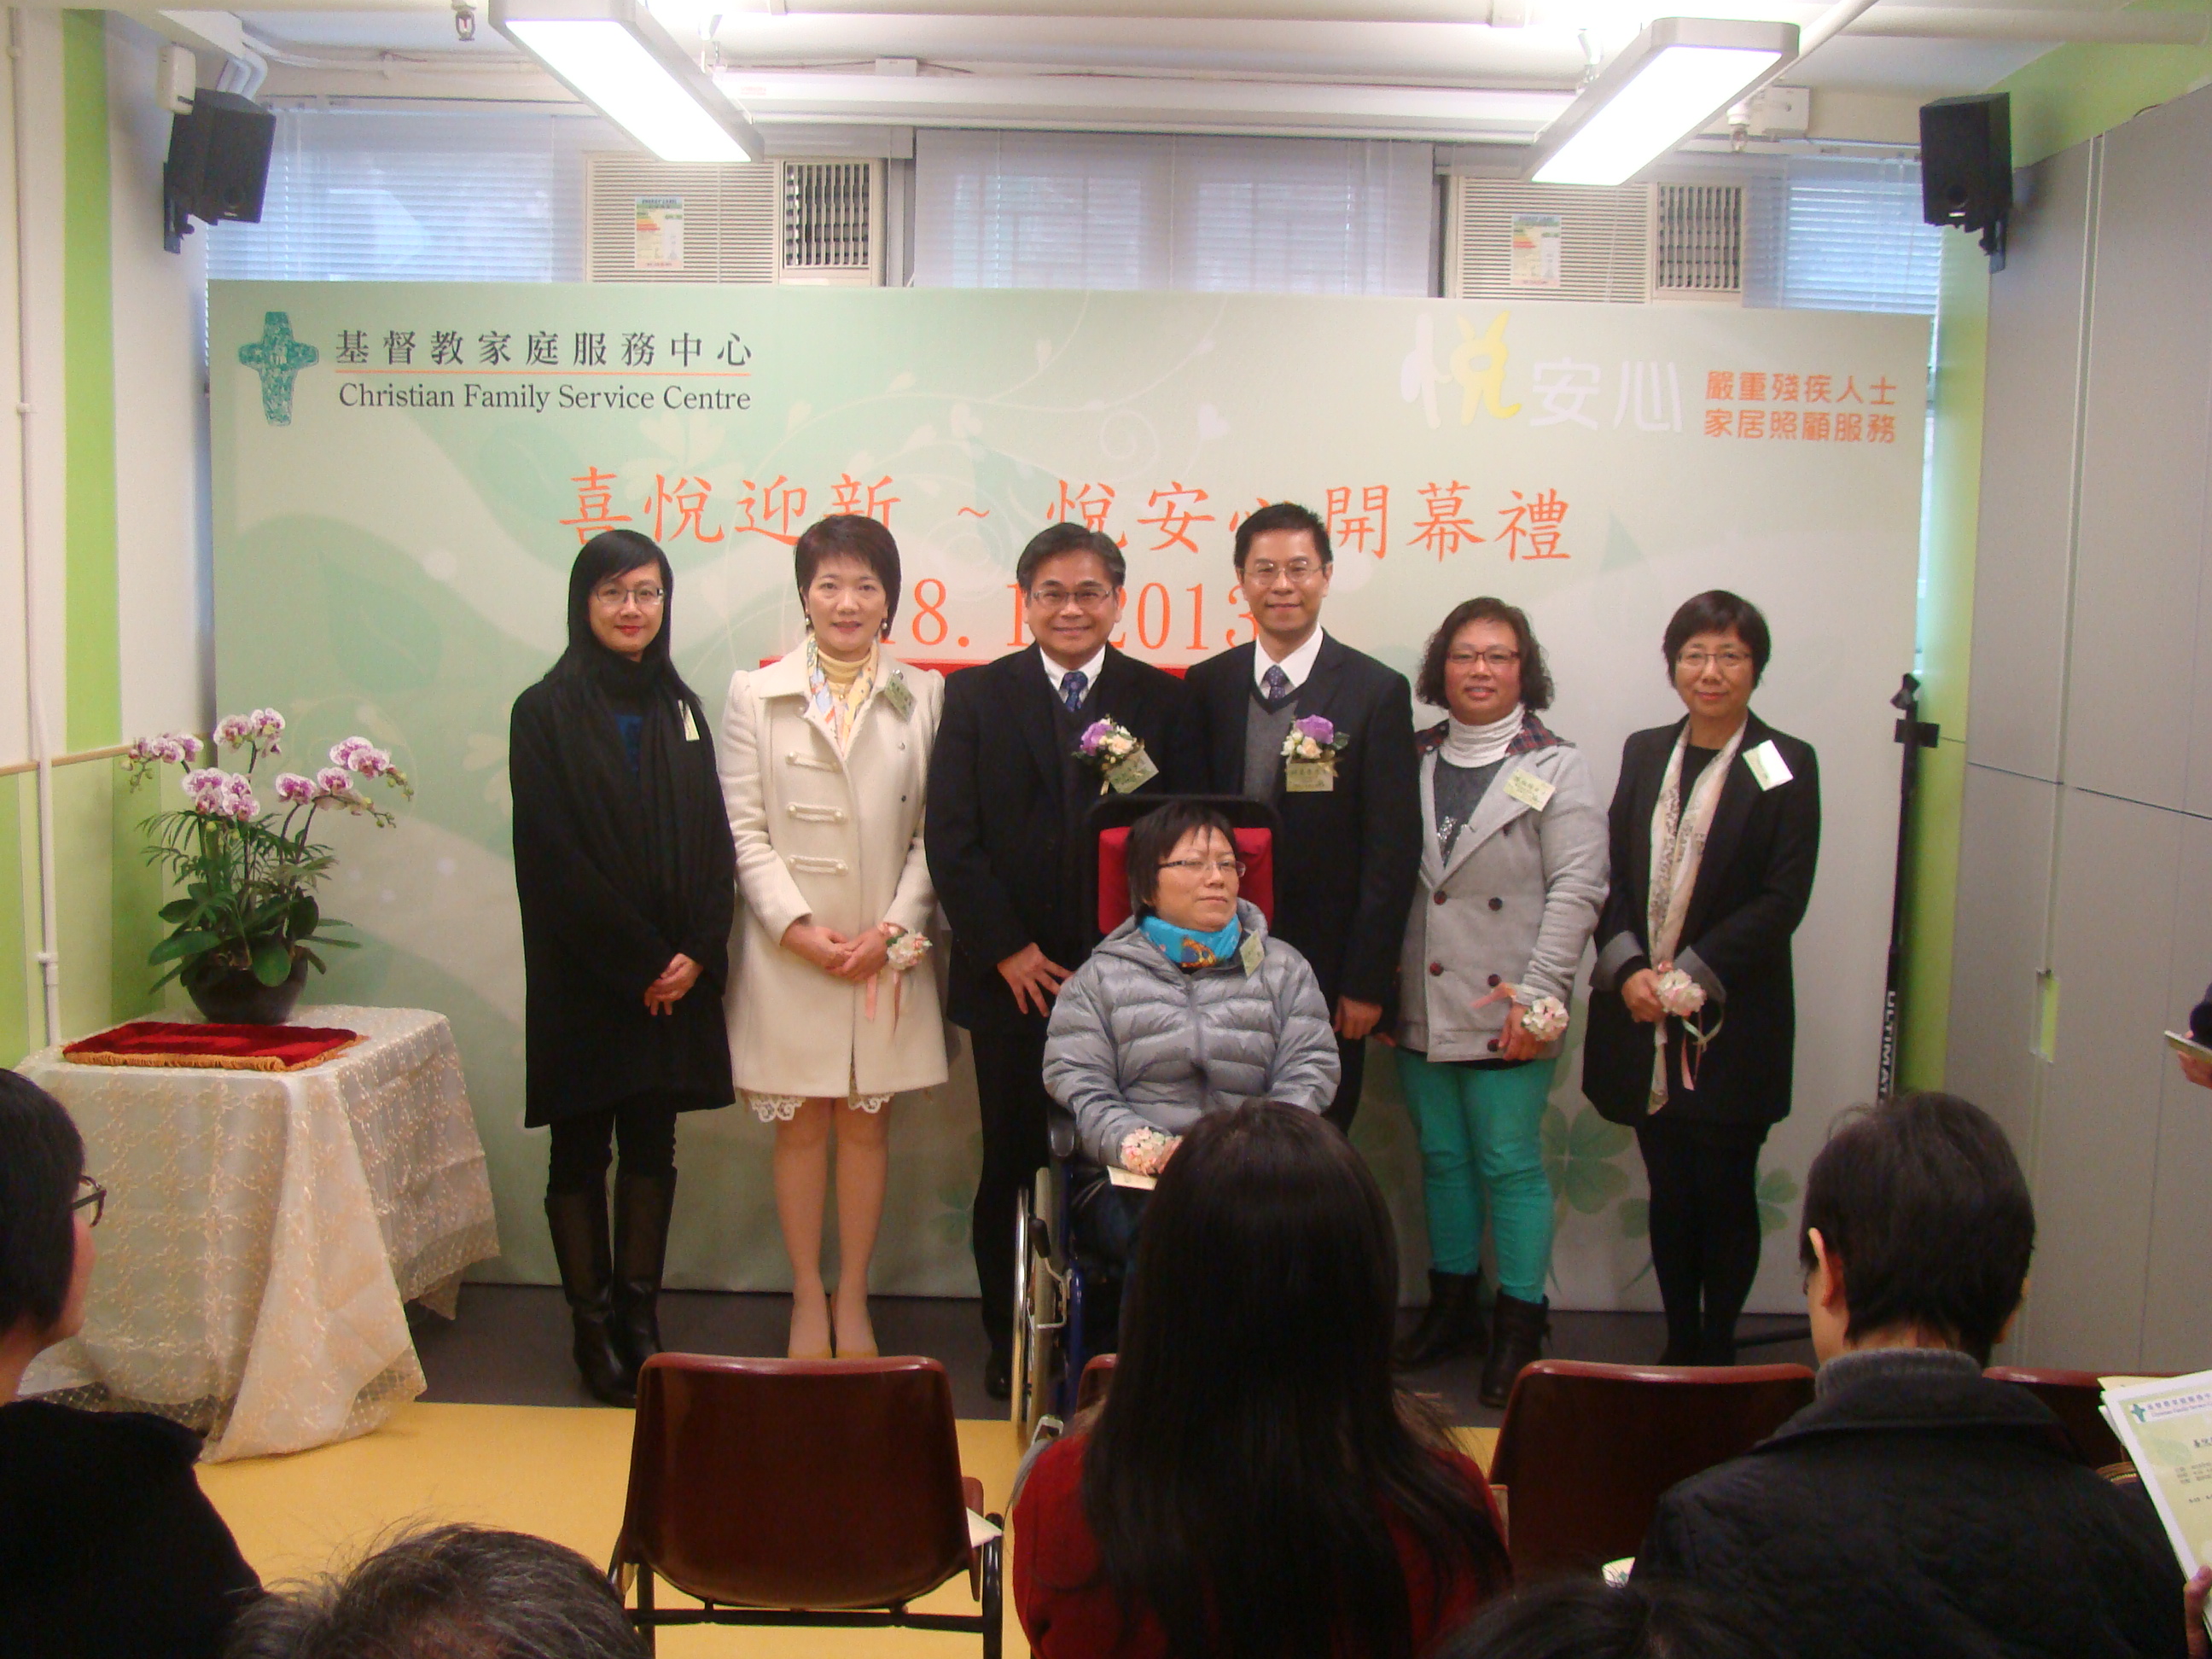 Everjoy - Home Care Service for Persons with Severe Disabilities Opening Ceremony Photo